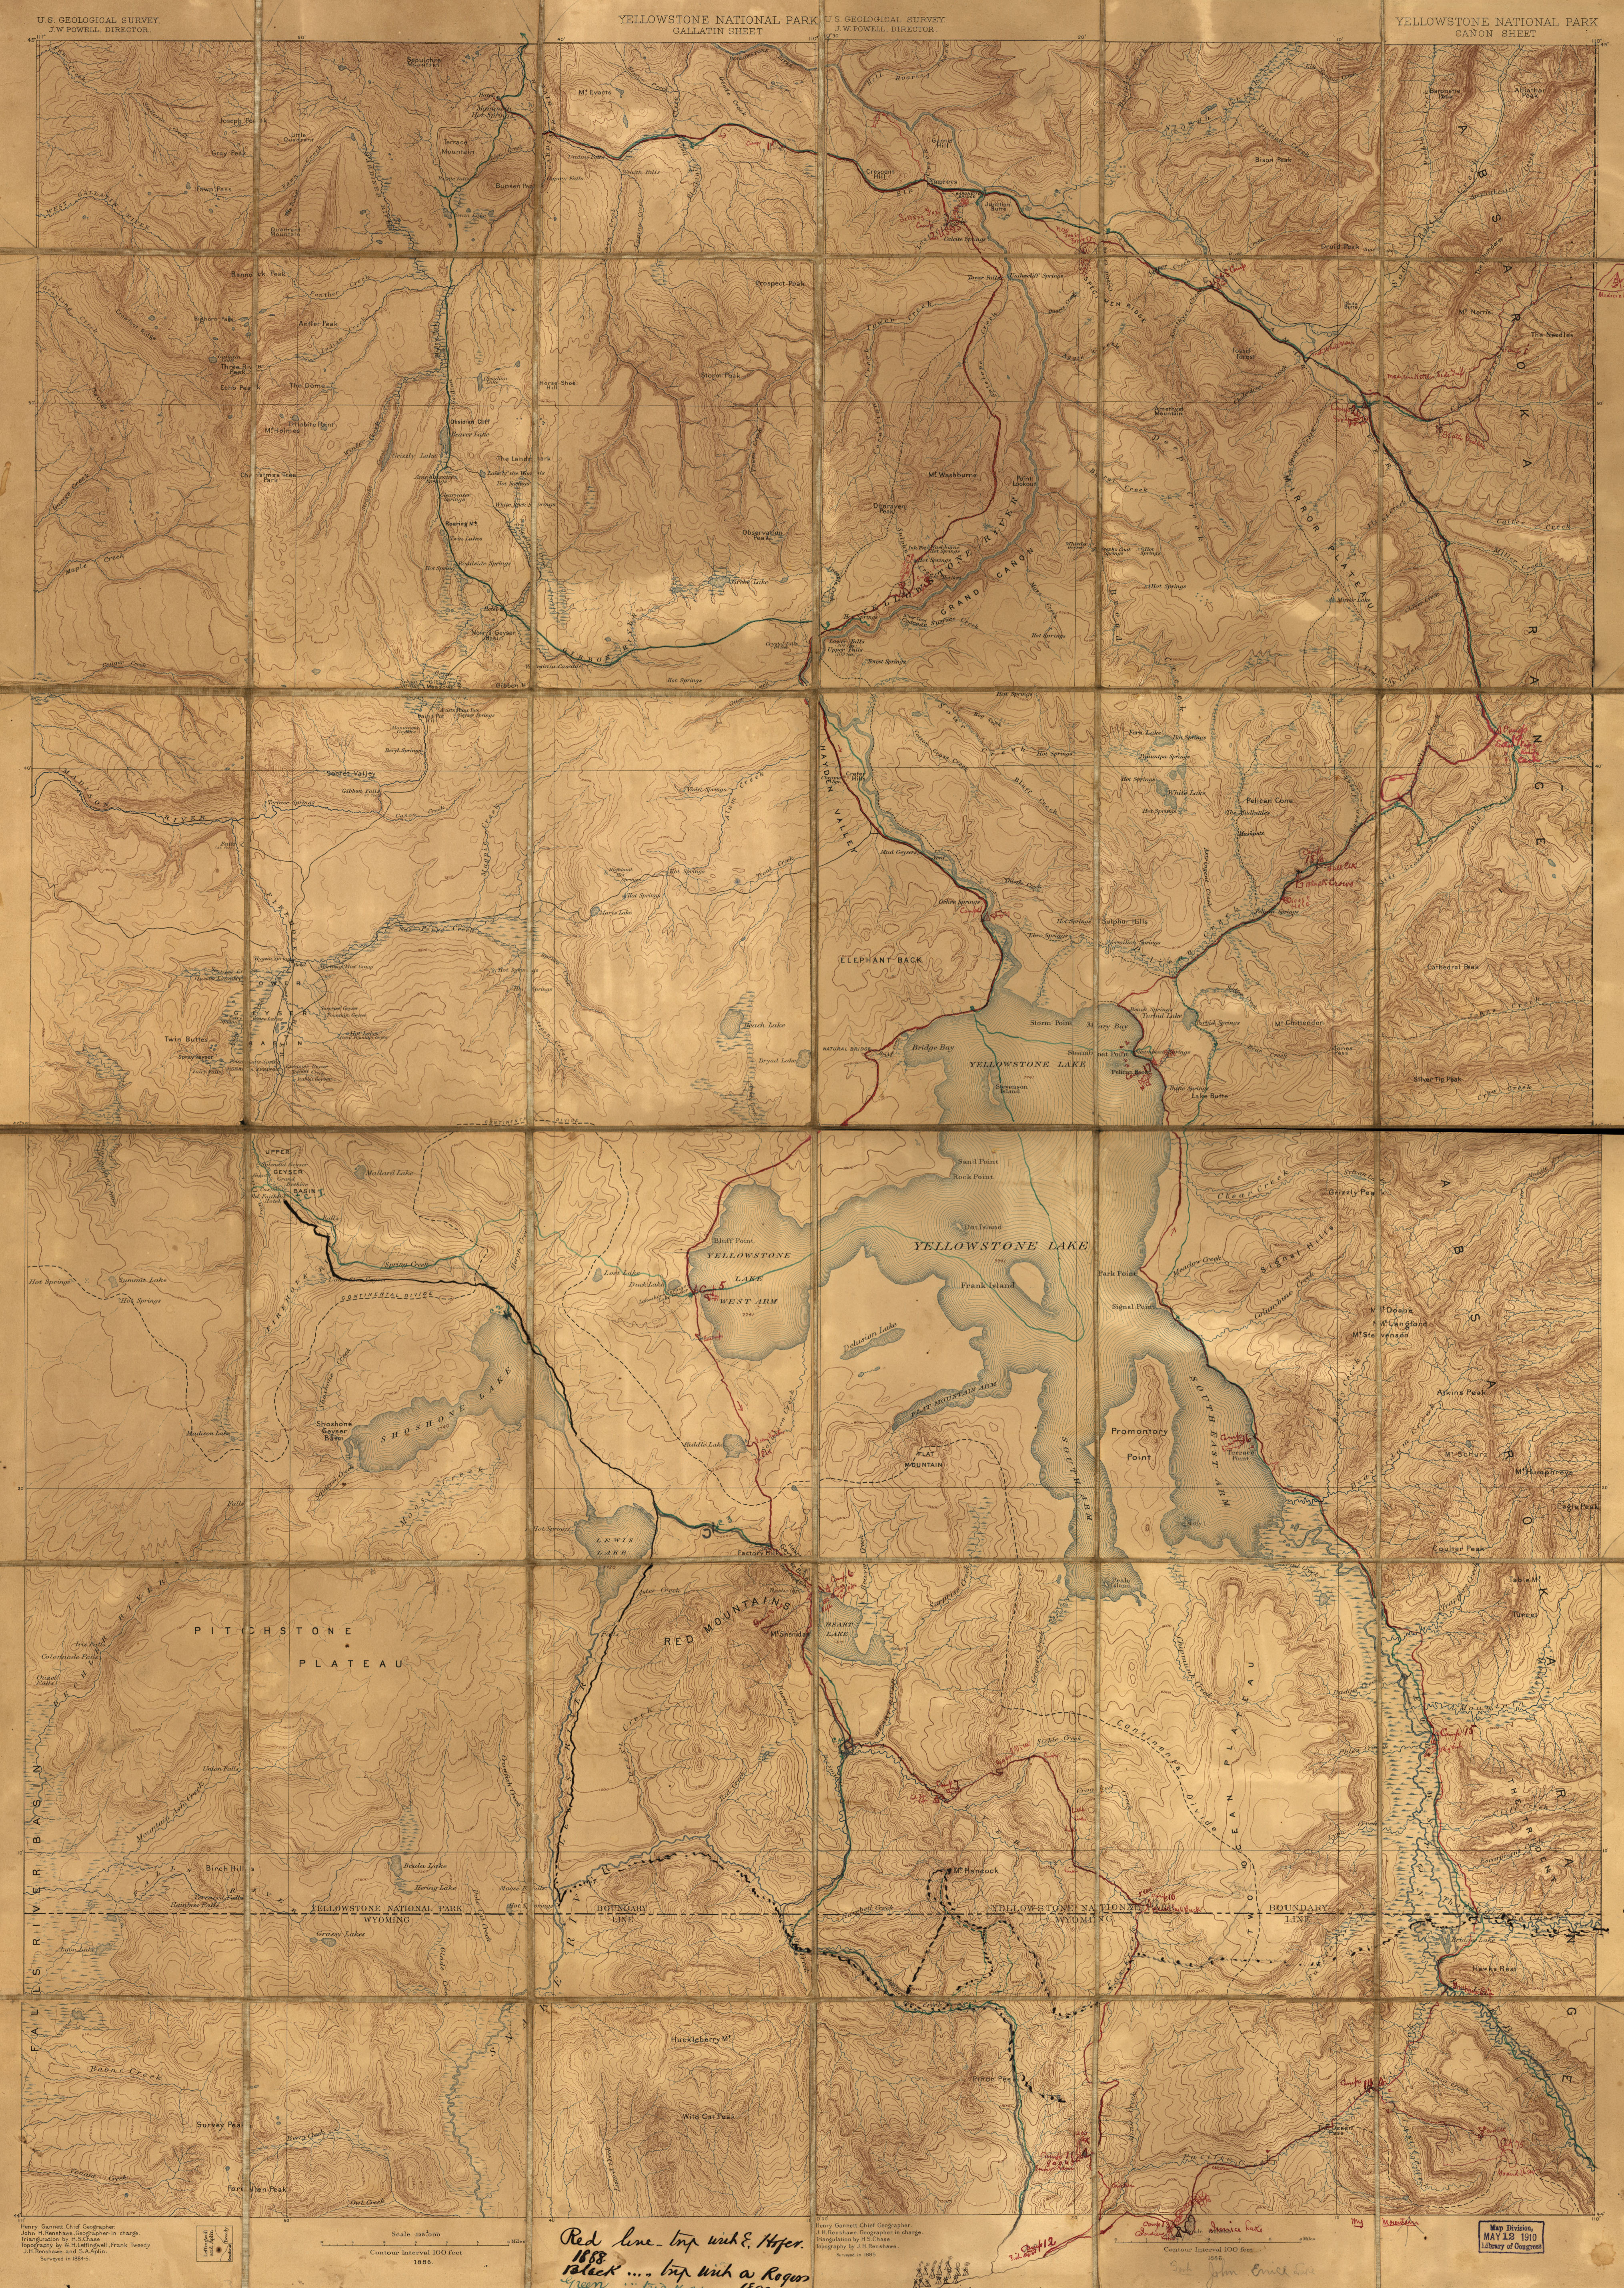 Yellowstone National Park 1884 Survey Map from the Library of Congress Collection